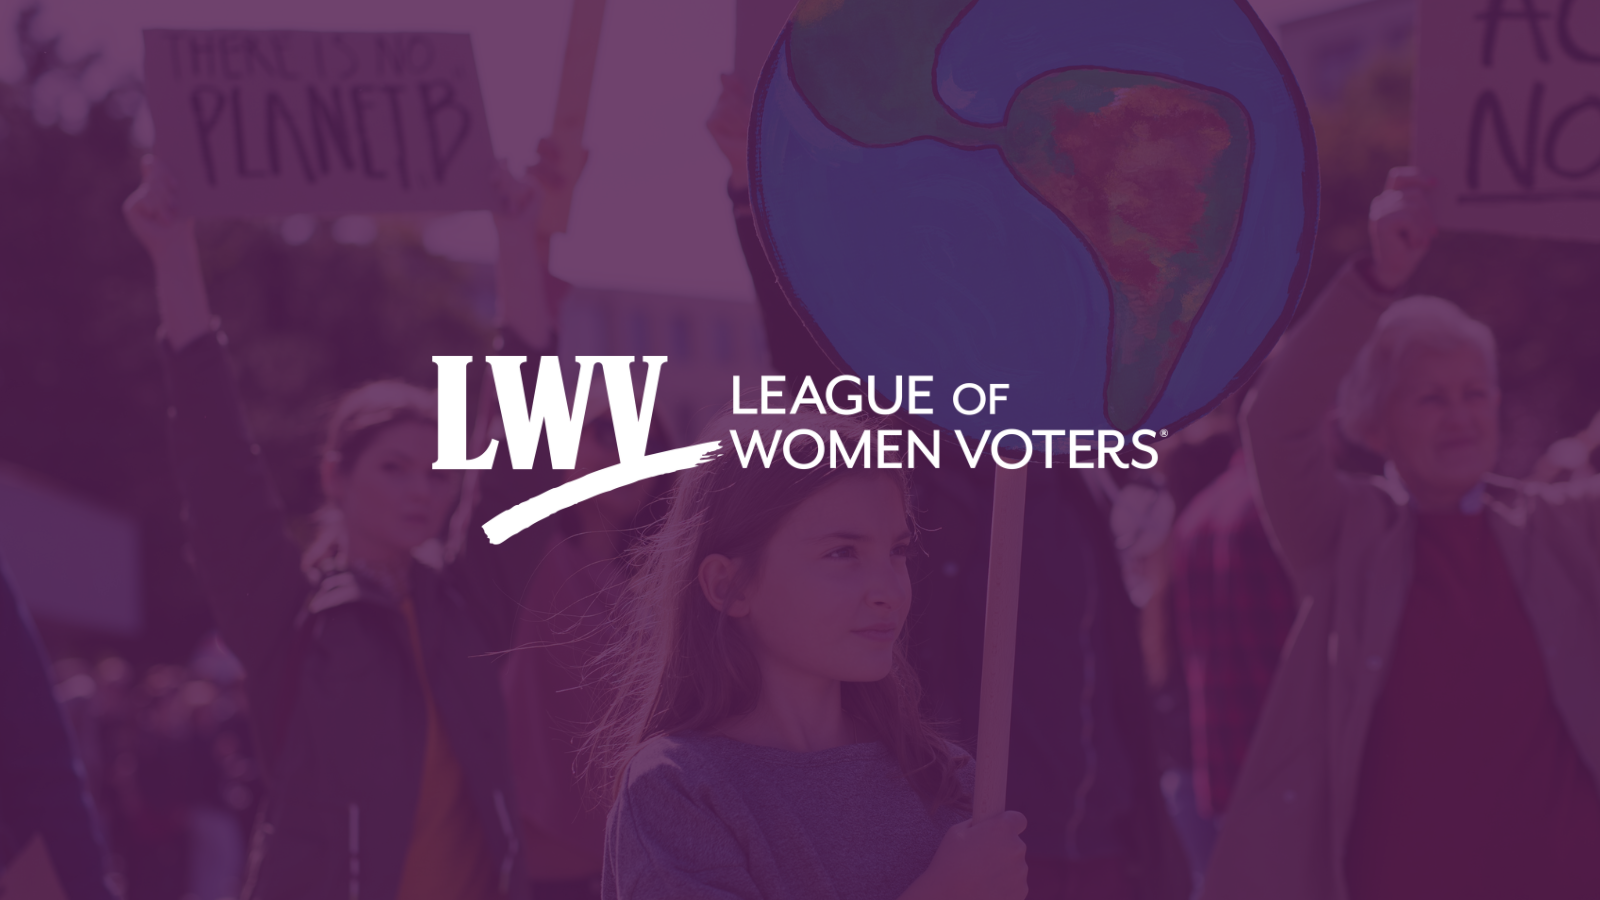 A girl holding a protest sign illustrating the Earth. The image has a purple overlay and the LWV logo is centered.